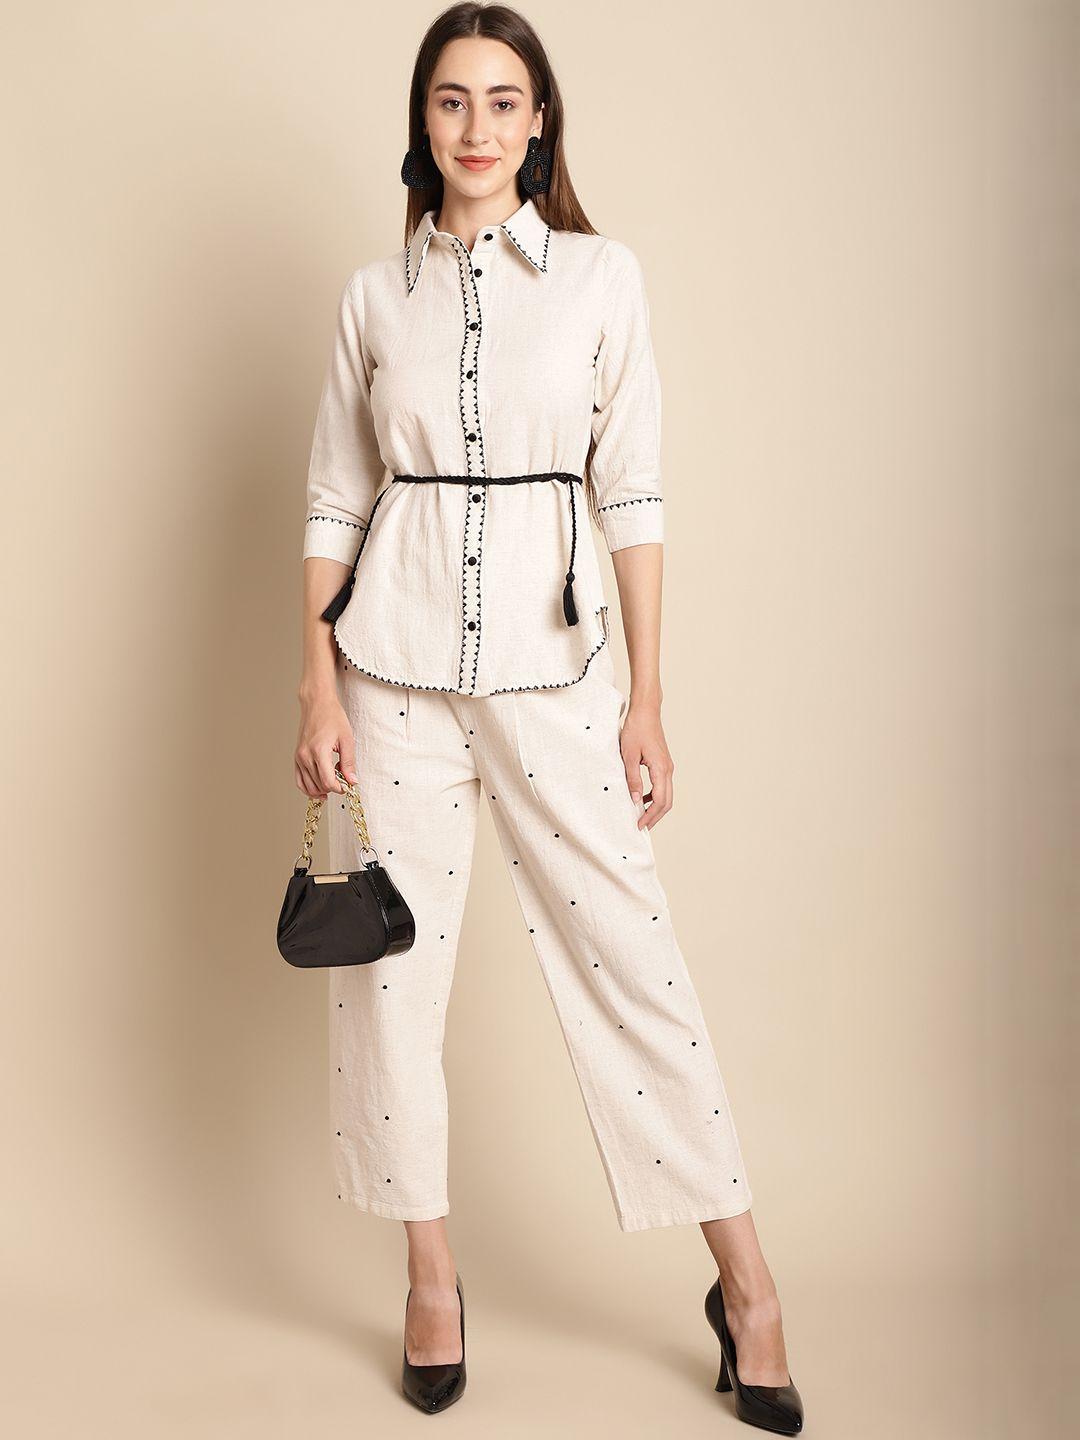 blanc9 embroidered shirt collar tie up shirt with trousers